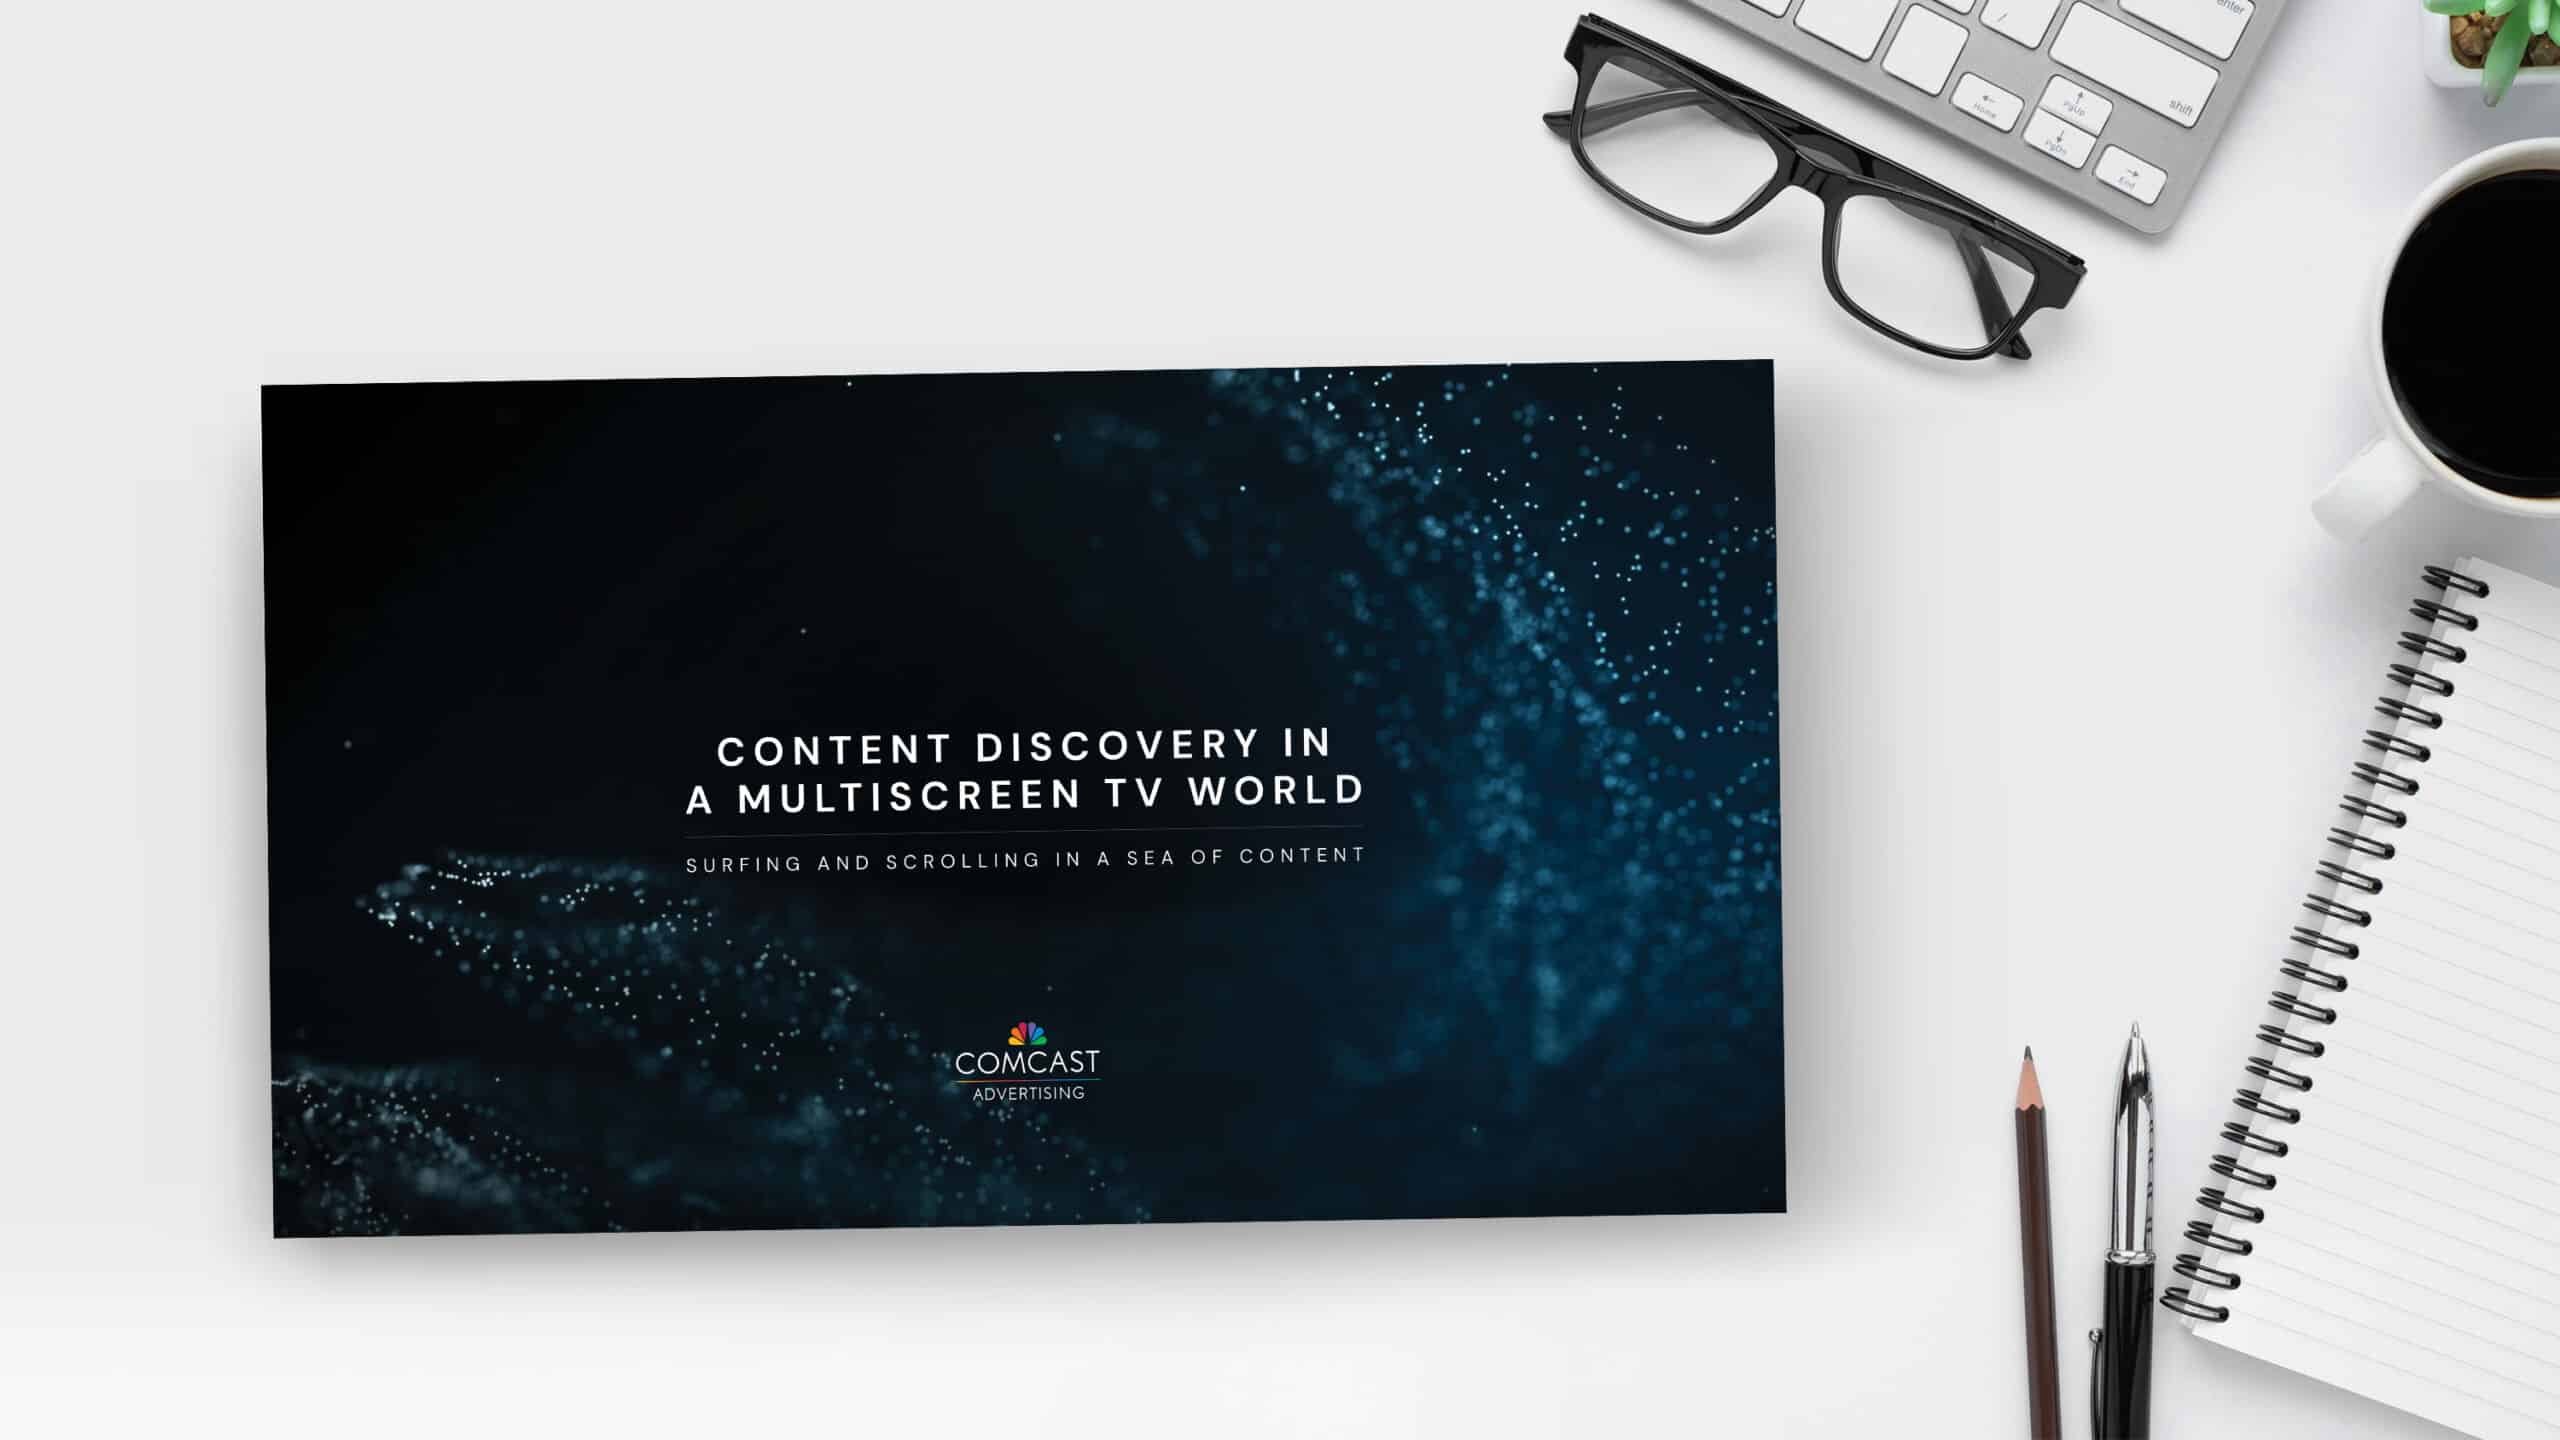 Content Discovery in a Multiscreen TV World